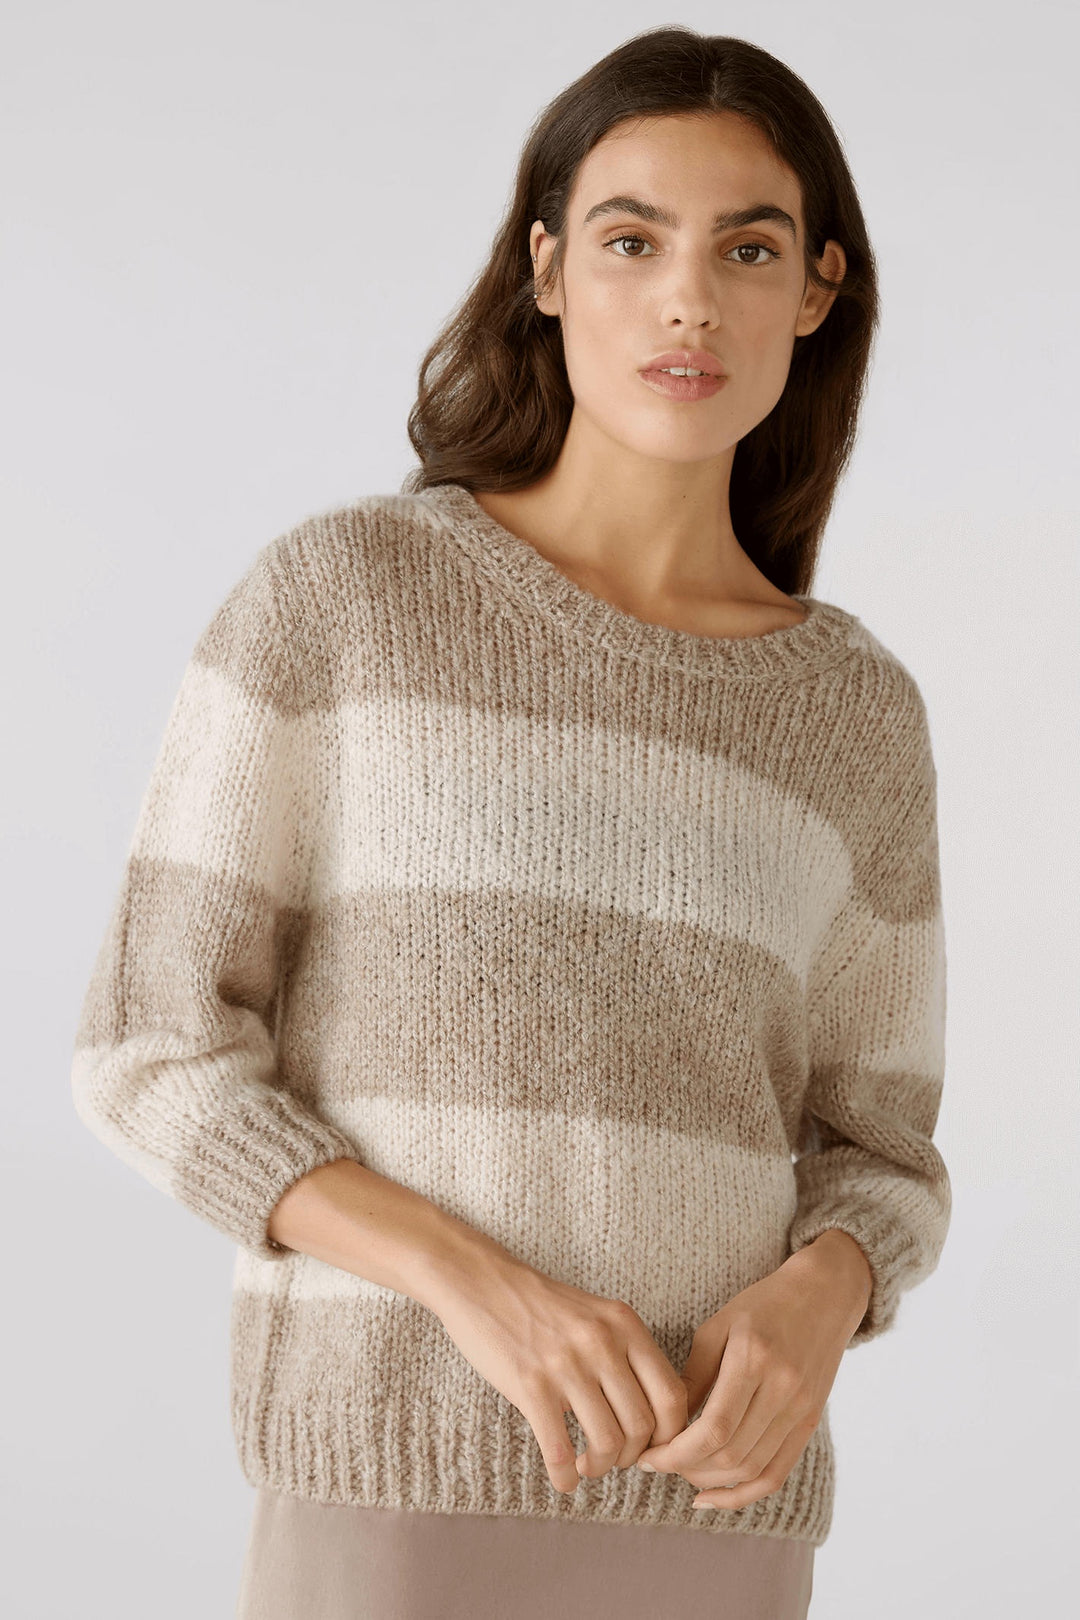 Oui 79633 Brown Striped Wide Neck Jumper - Dotique Chesterfield